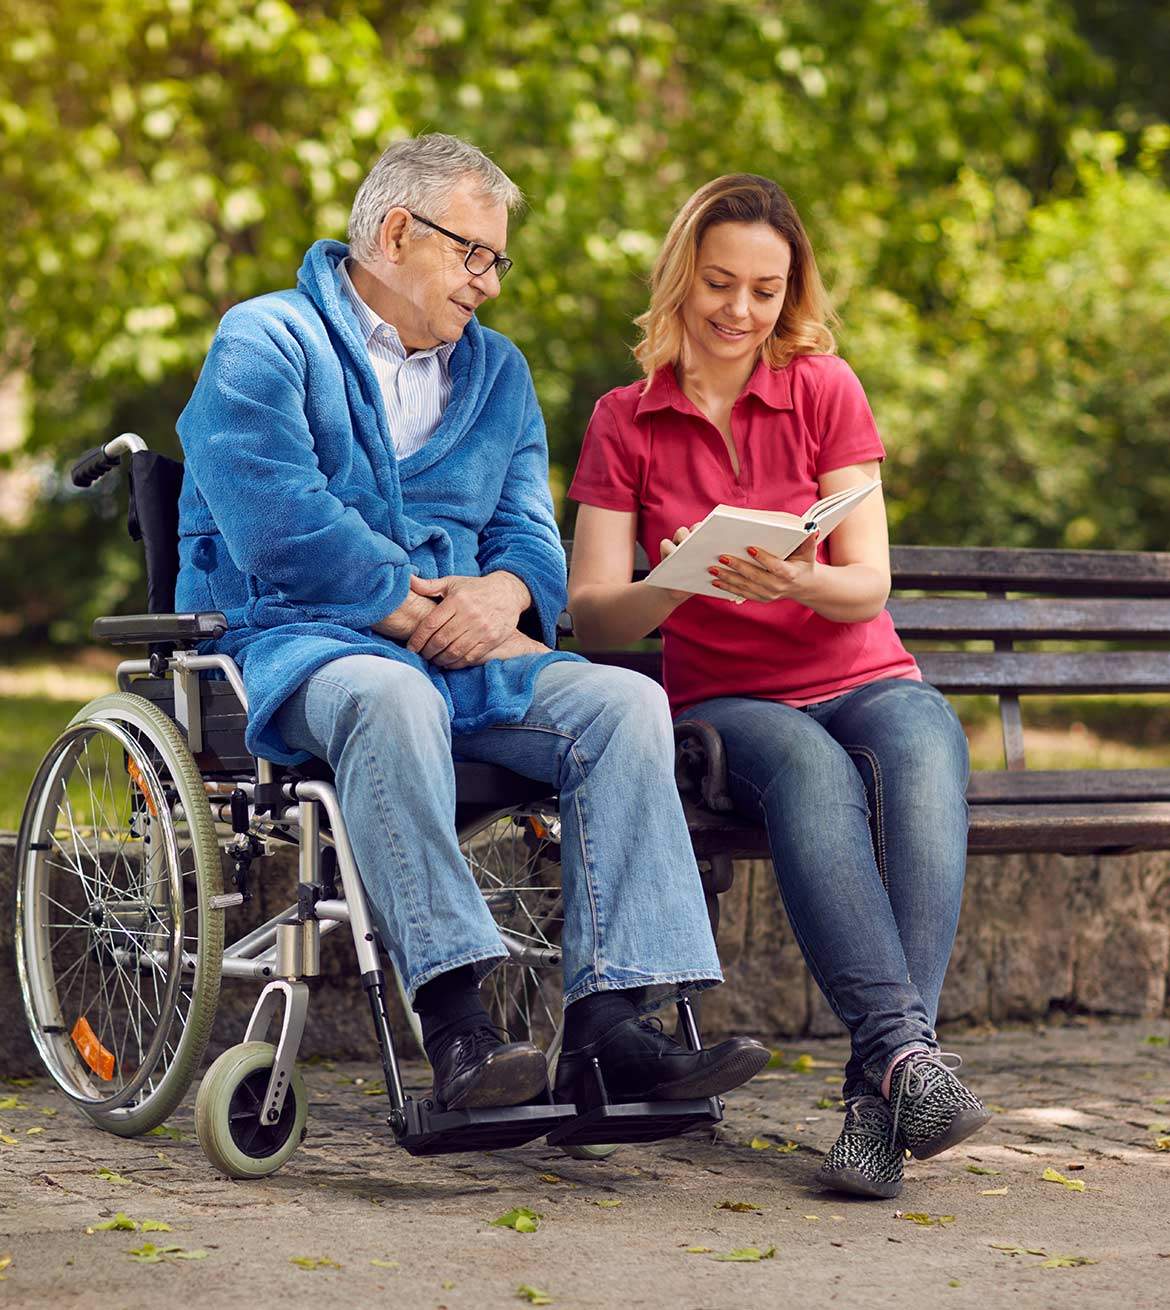 A female caregiver reads to a man in a wheelchair